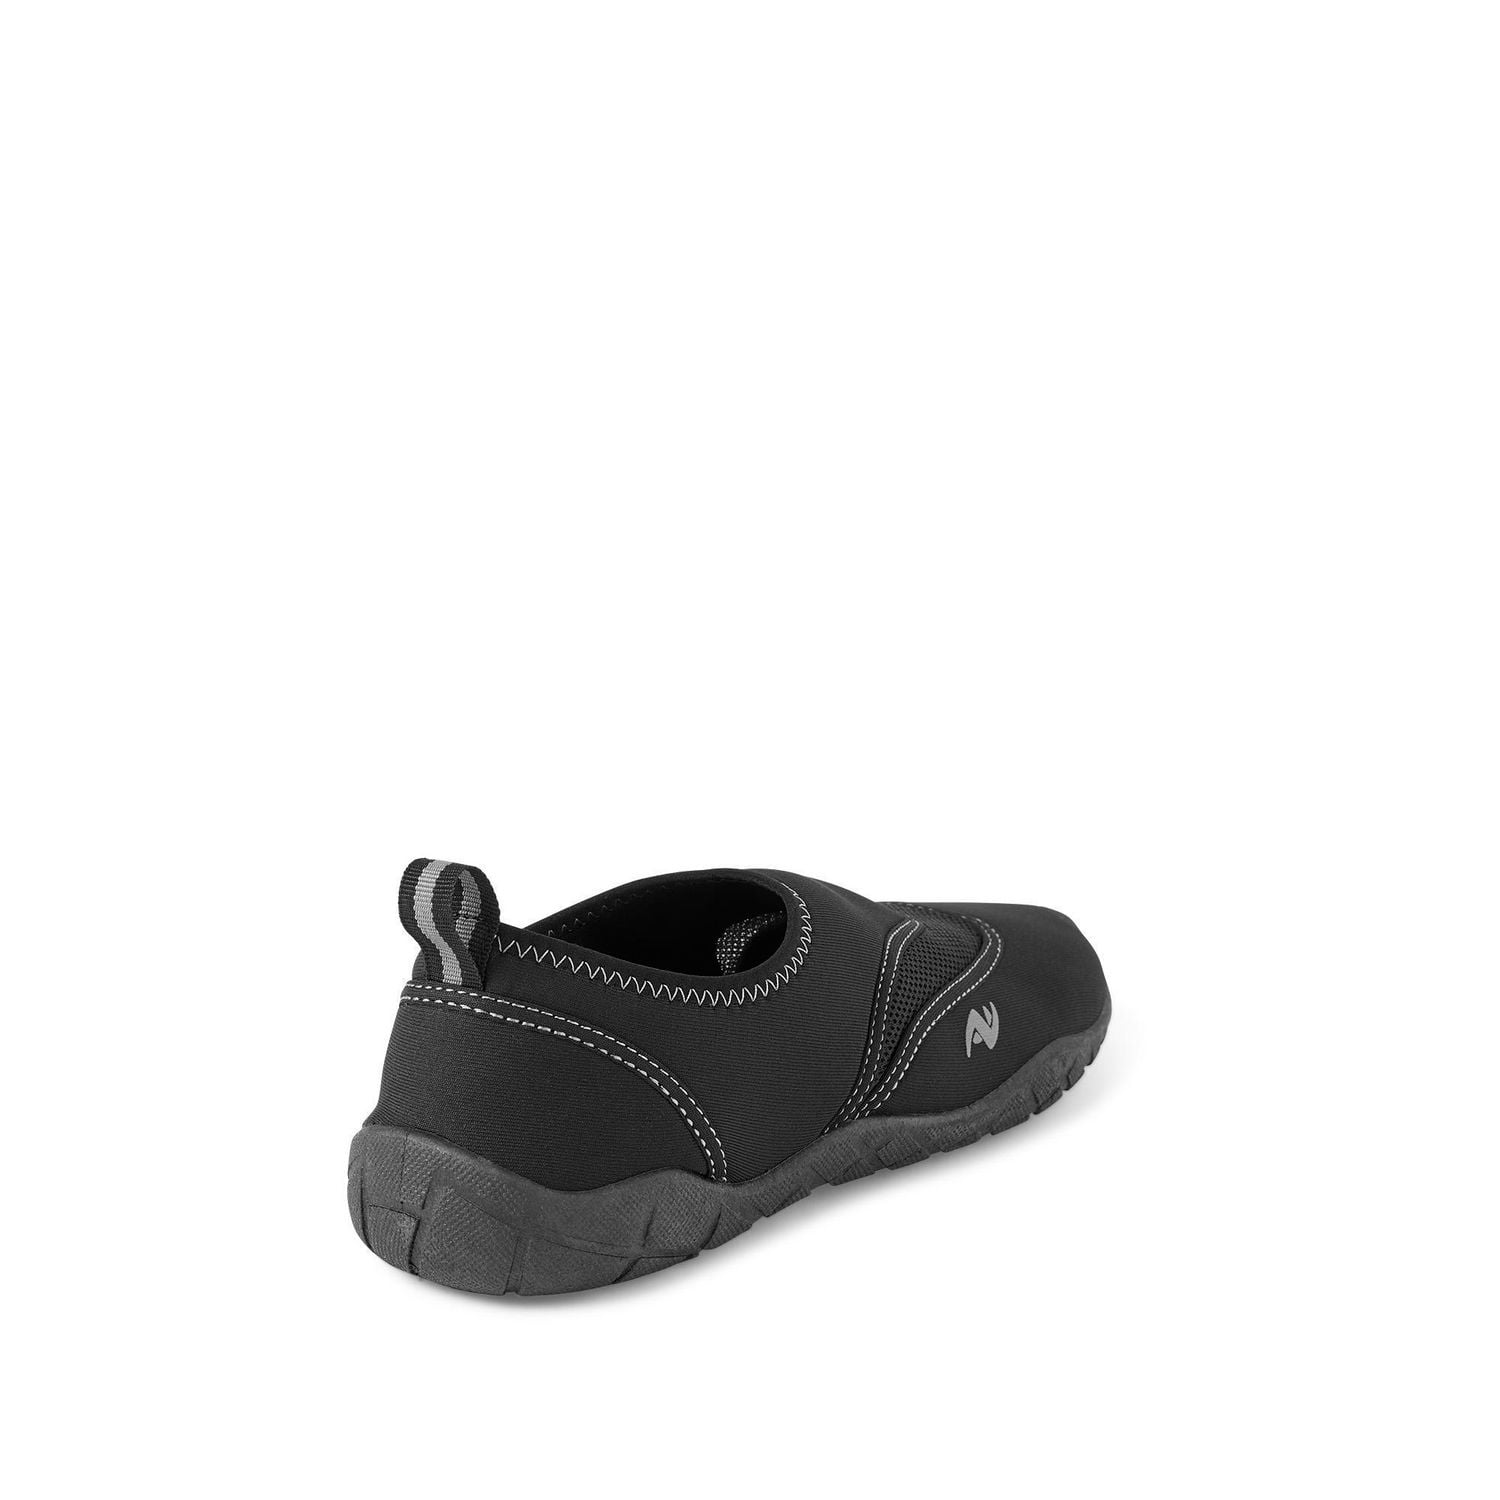 Athletic Works Women's Water Shoes, Sizes 5/6-11/12 